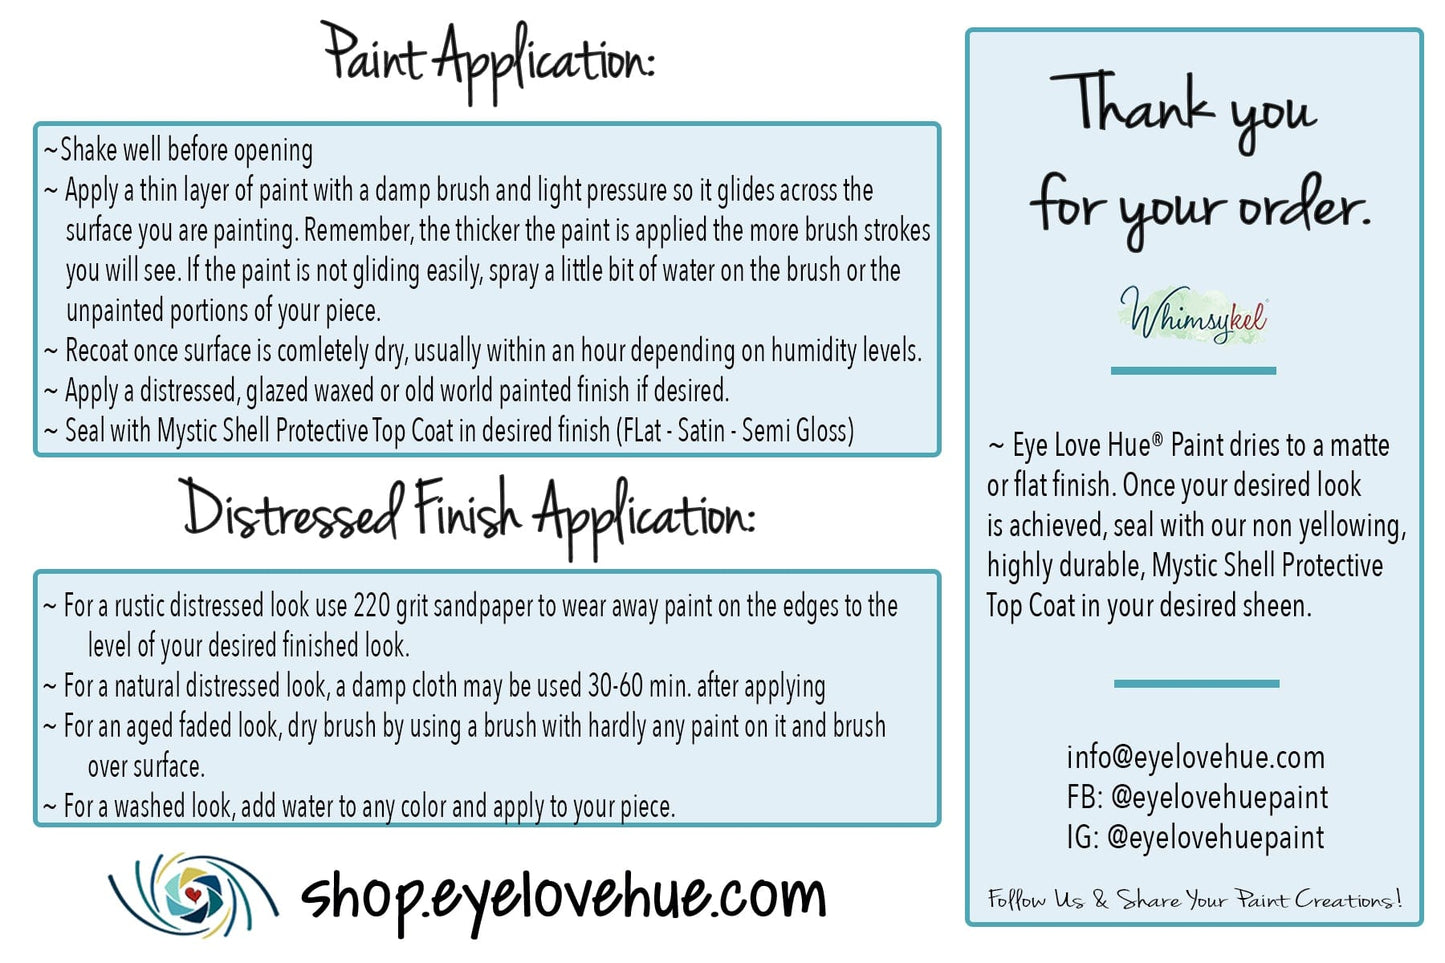 Eye Love Hue Paint & Products Barefoot- Indigo Creek Collection Acrylic Mineral Paint Chalk Paint Clay Paint